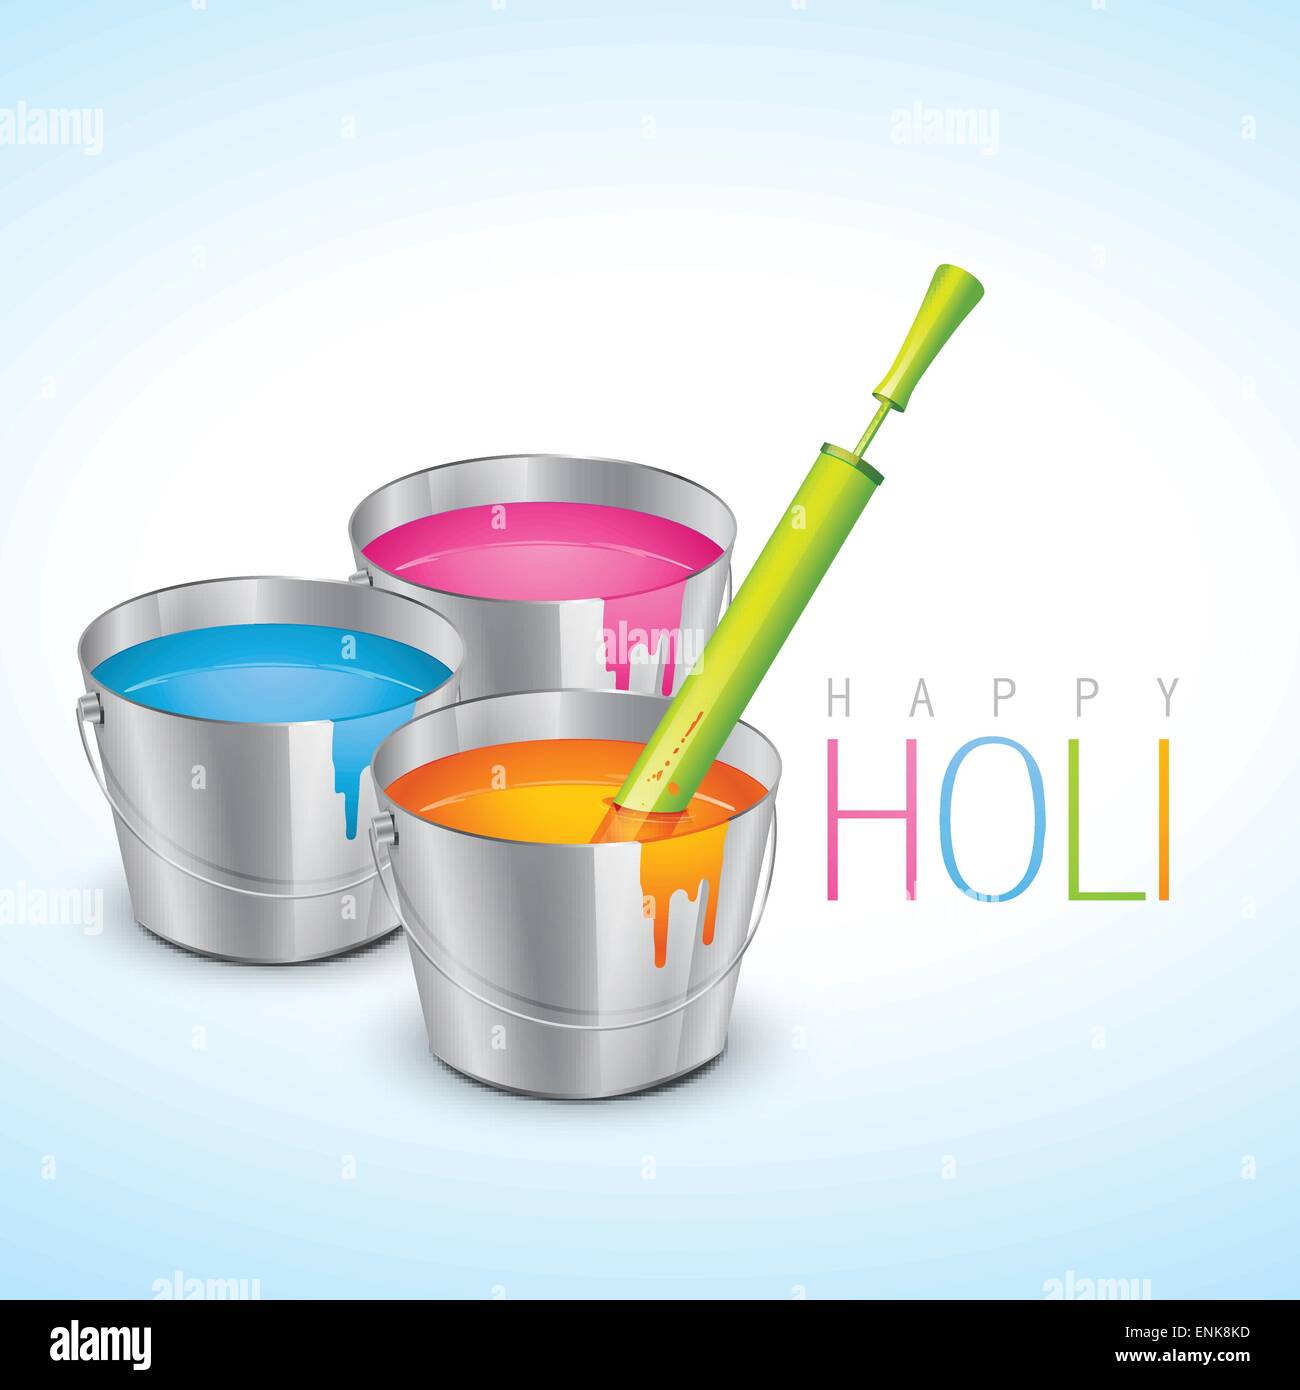 Vector Illustration Of Colorful Holi Festival Bucket With Colors And